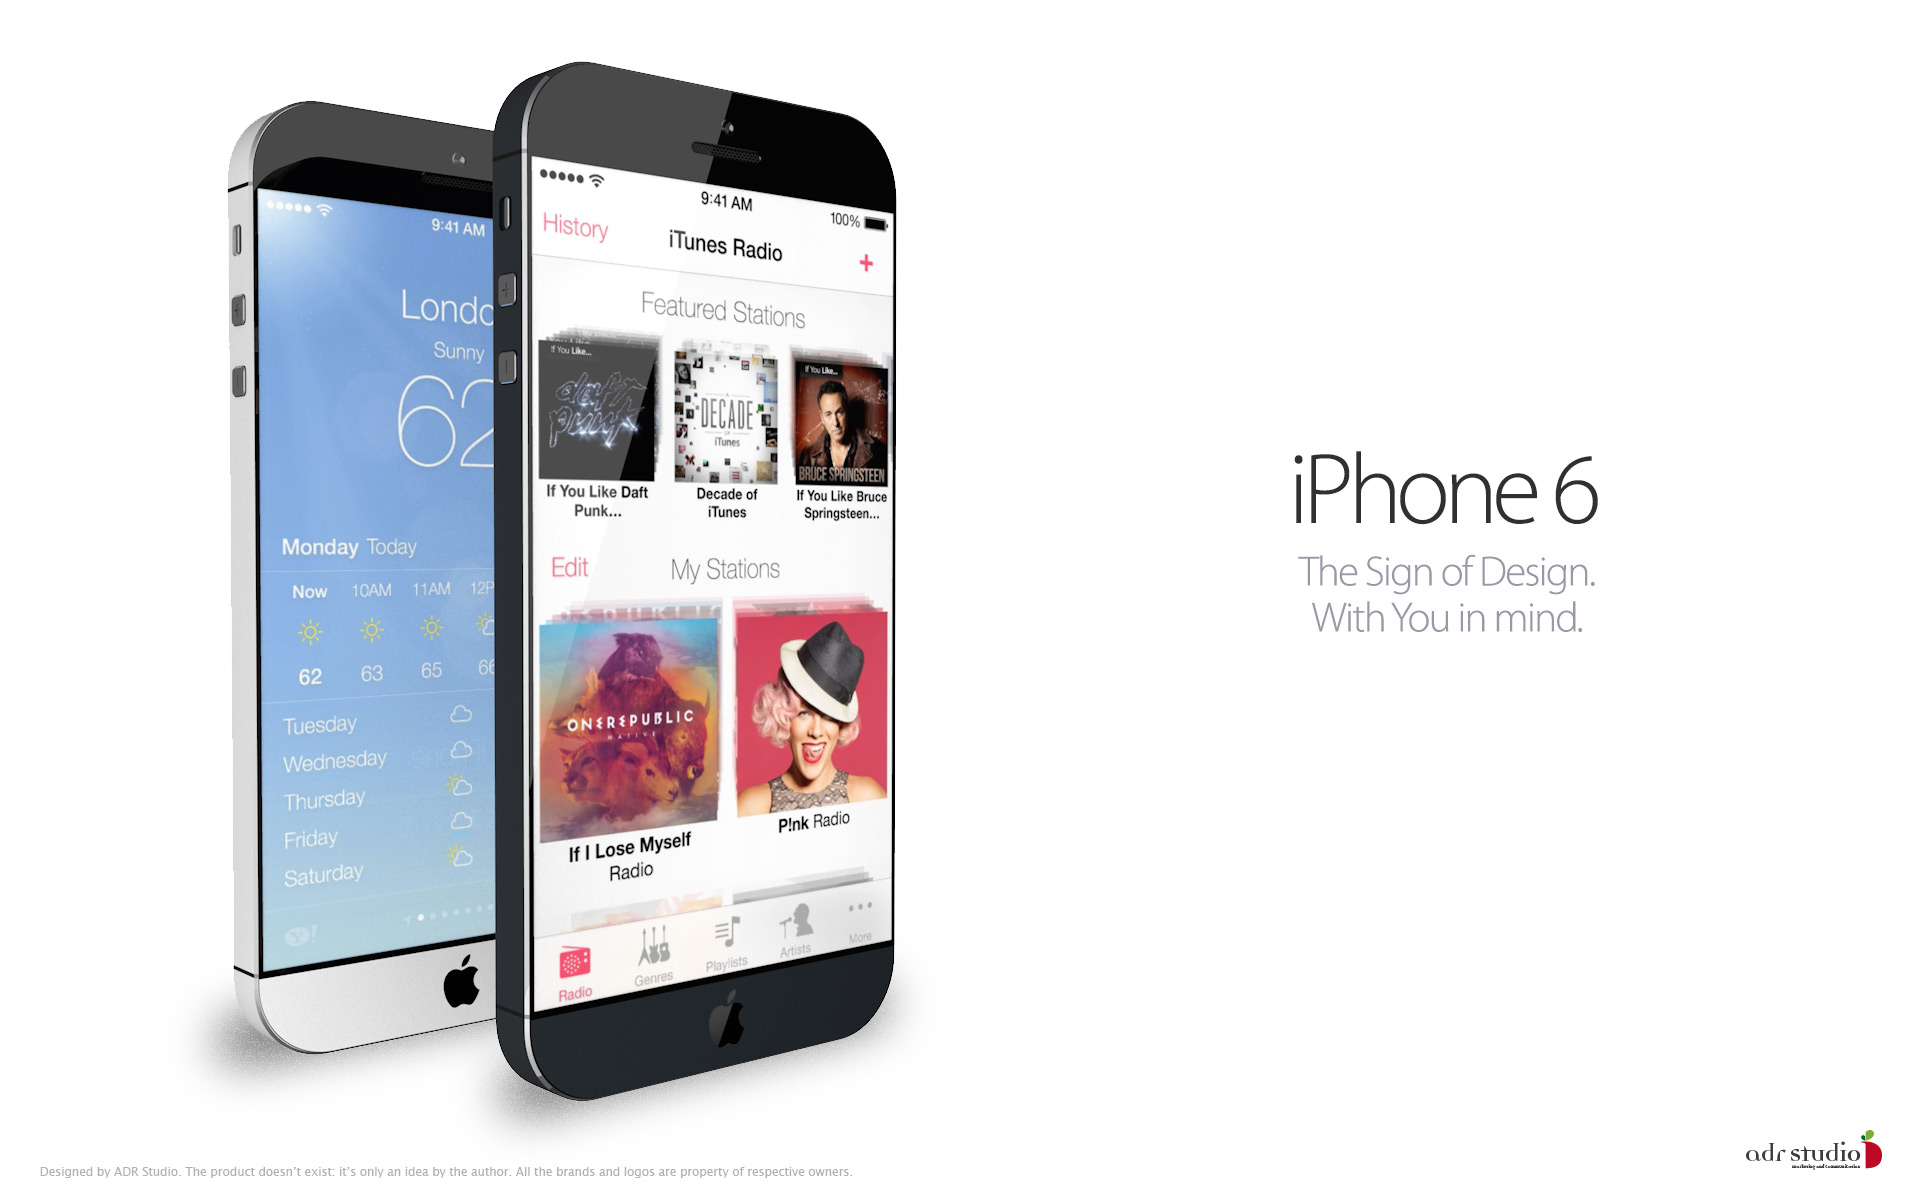 New iPhone 6 images compare size with the iPhone 5S